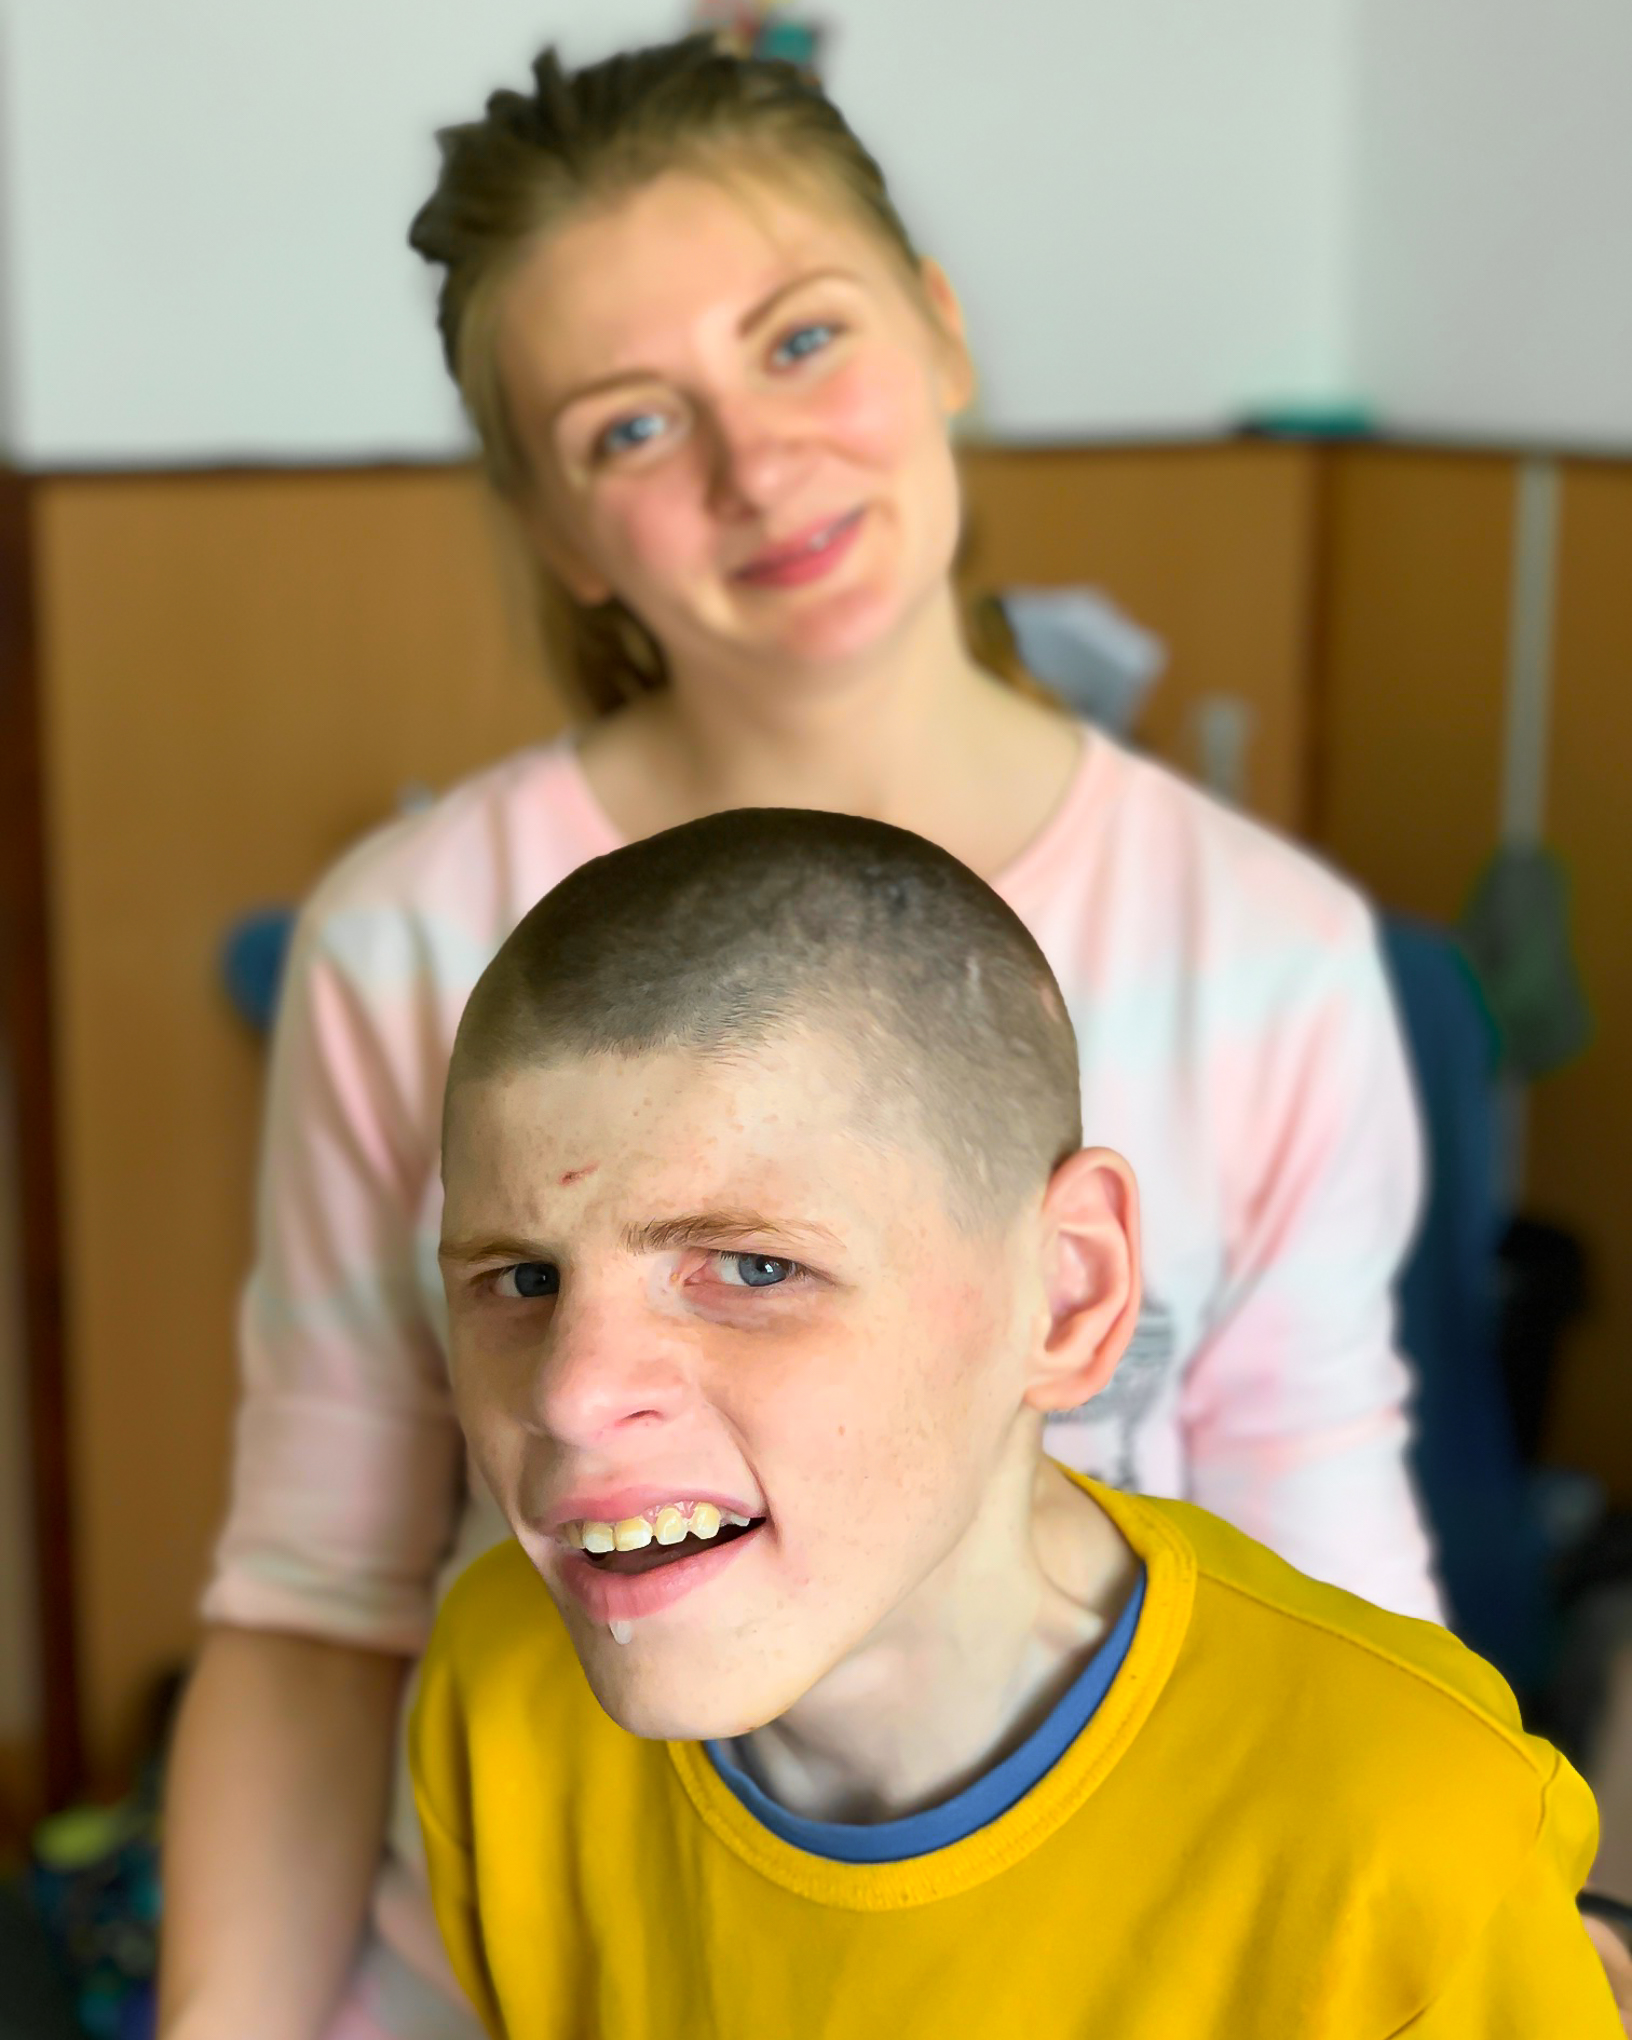 A teenage girl stands smiling behind a teenage boy with special needs in a brightly light room.